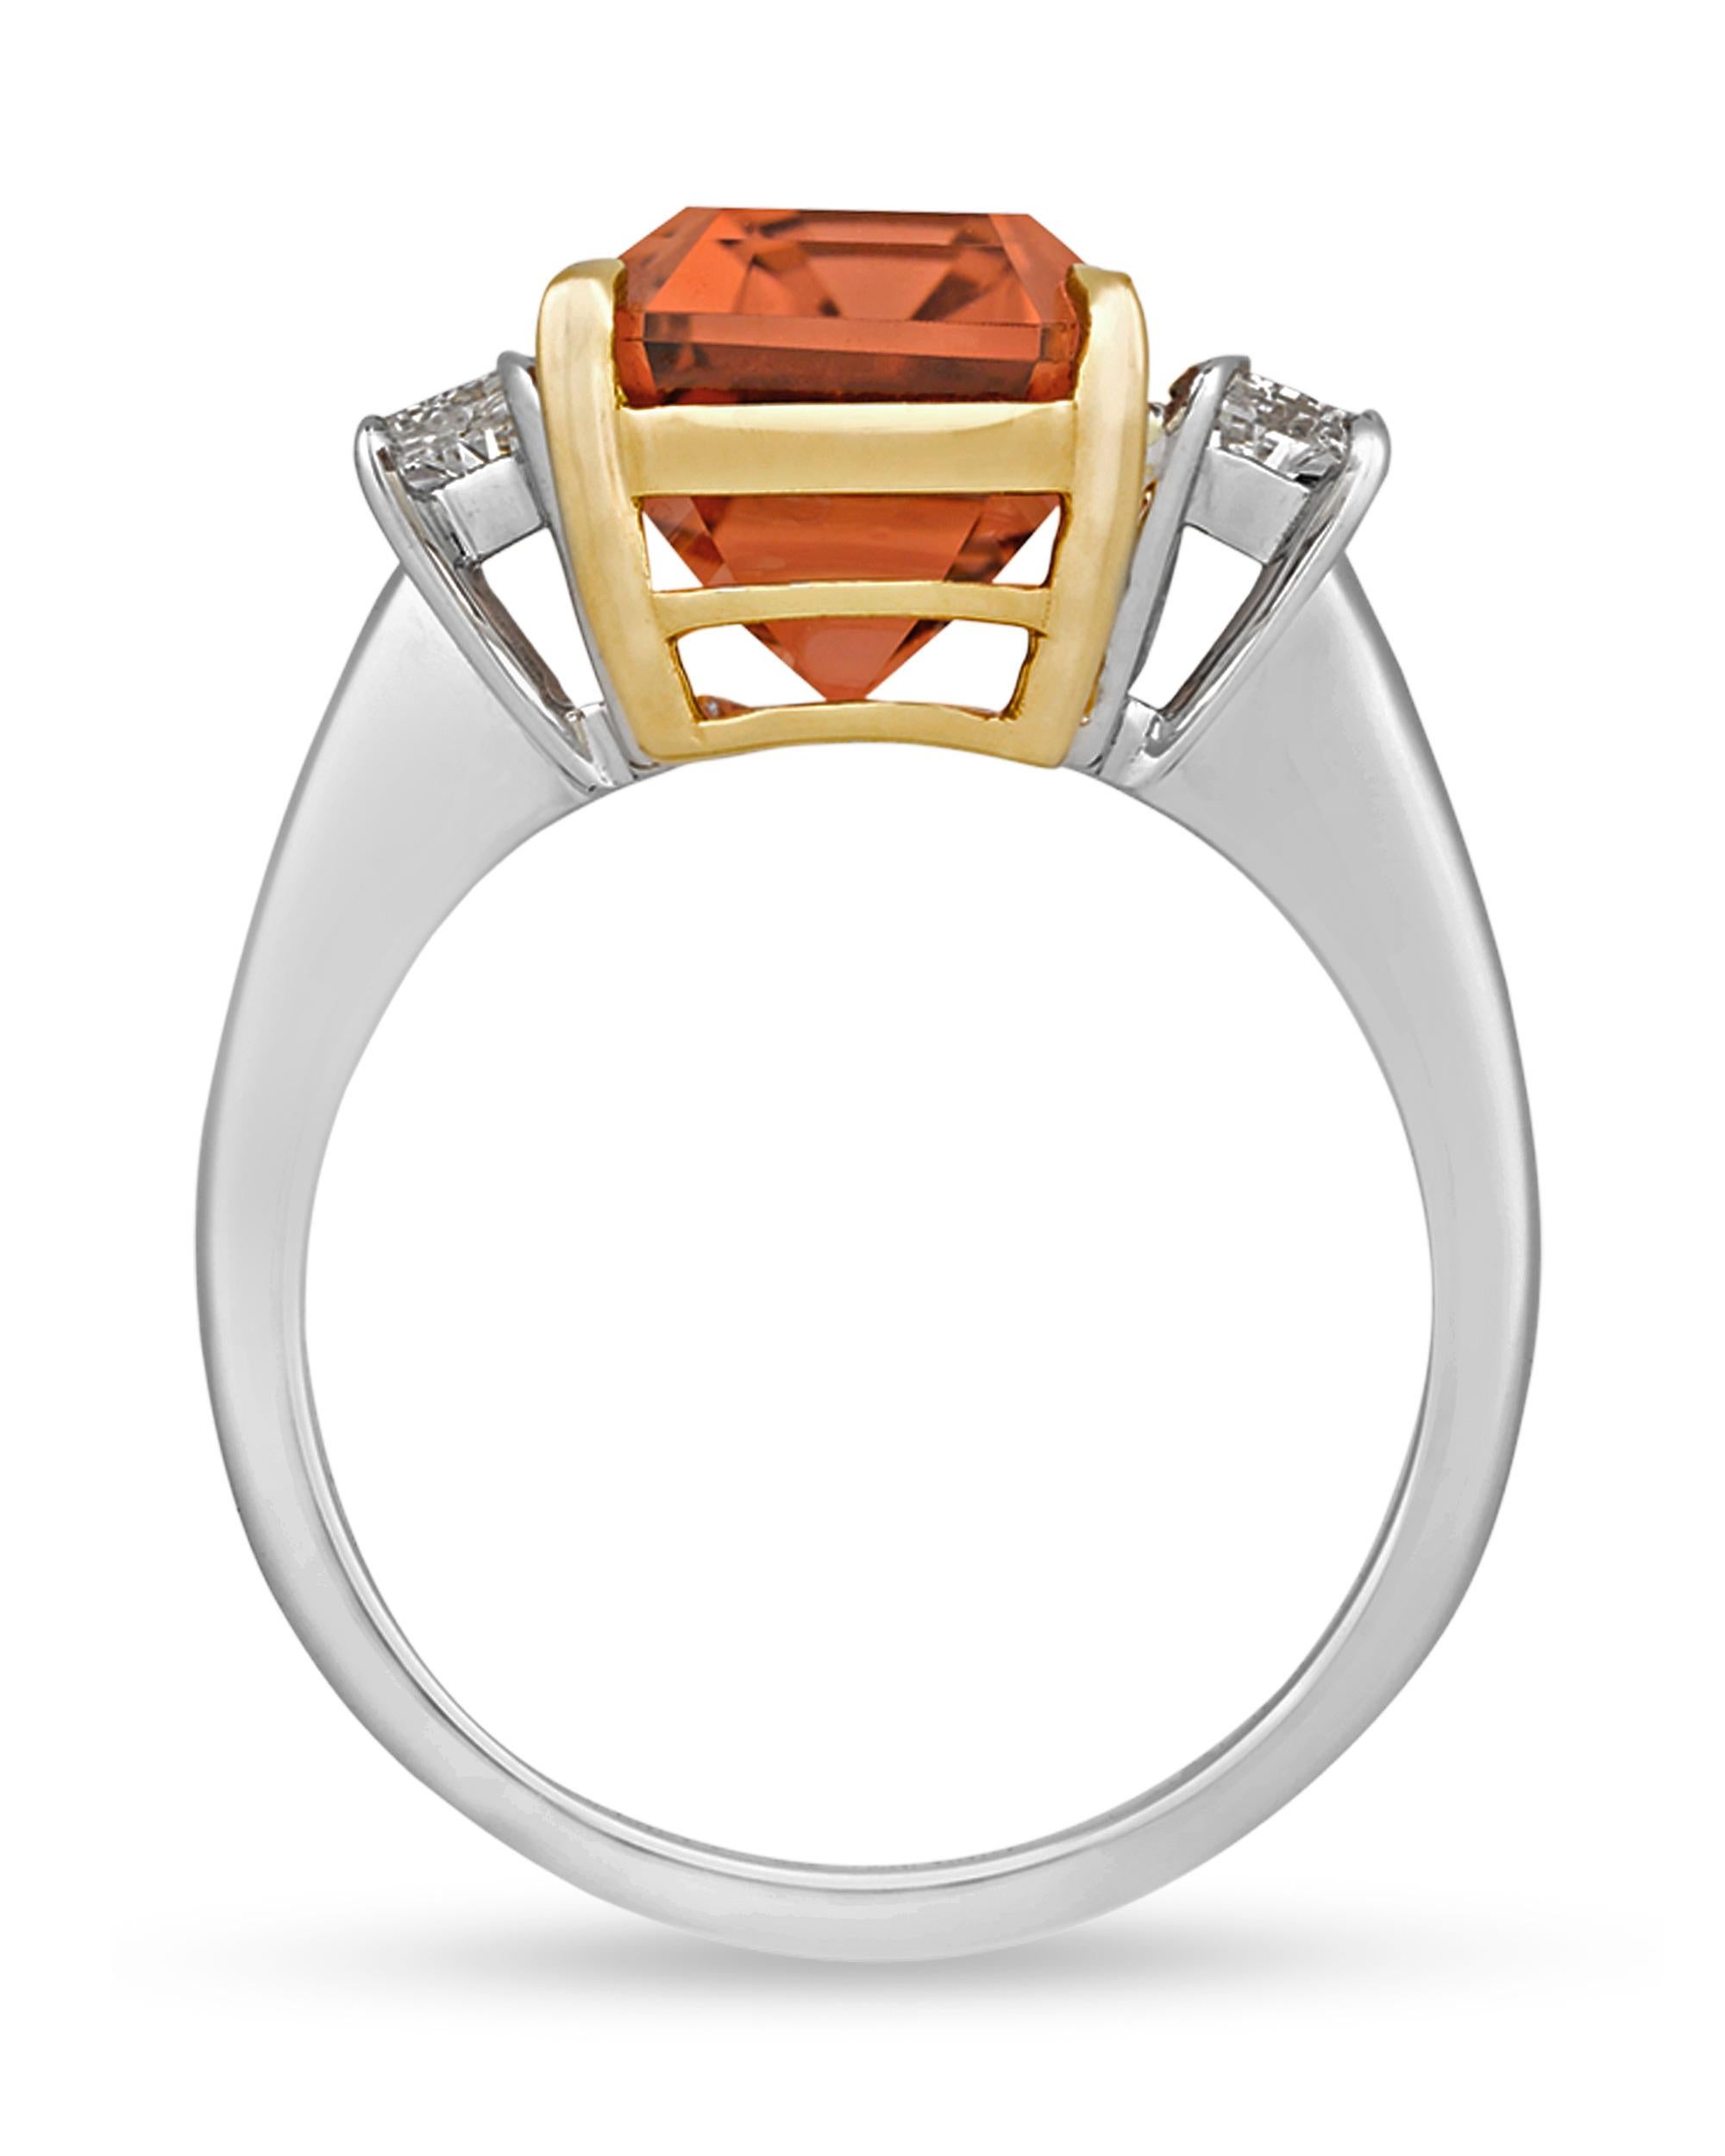 A highly unique peach tourmaline is set in this impressive ring. Displaying a distinctive orange-pink hue, the octagonal-cut gemstone features an elongated cut that makes the most of its 10.79-carat weight. The tourmaline is flanked on each side by